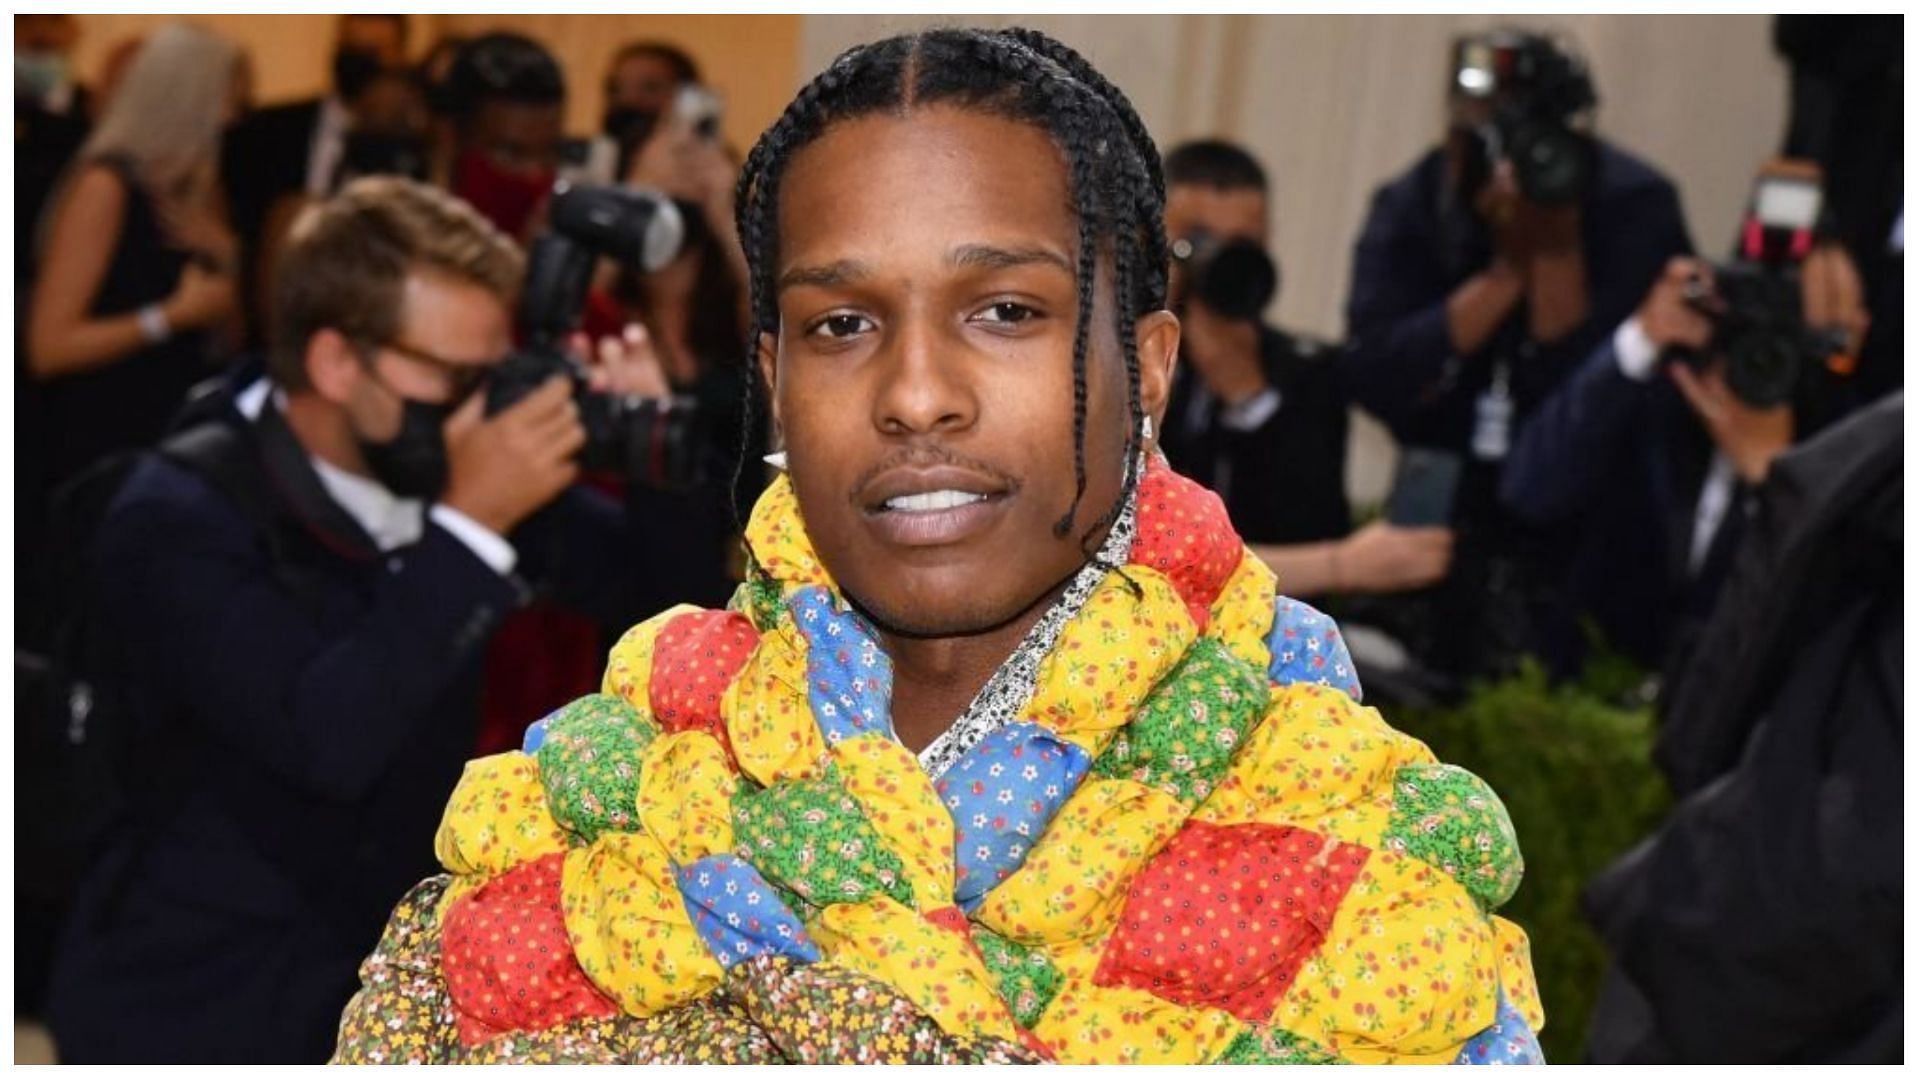 ASAP Rocky has been a victim of legal issues in the past (Image via Angela Weiss/Getty Images)